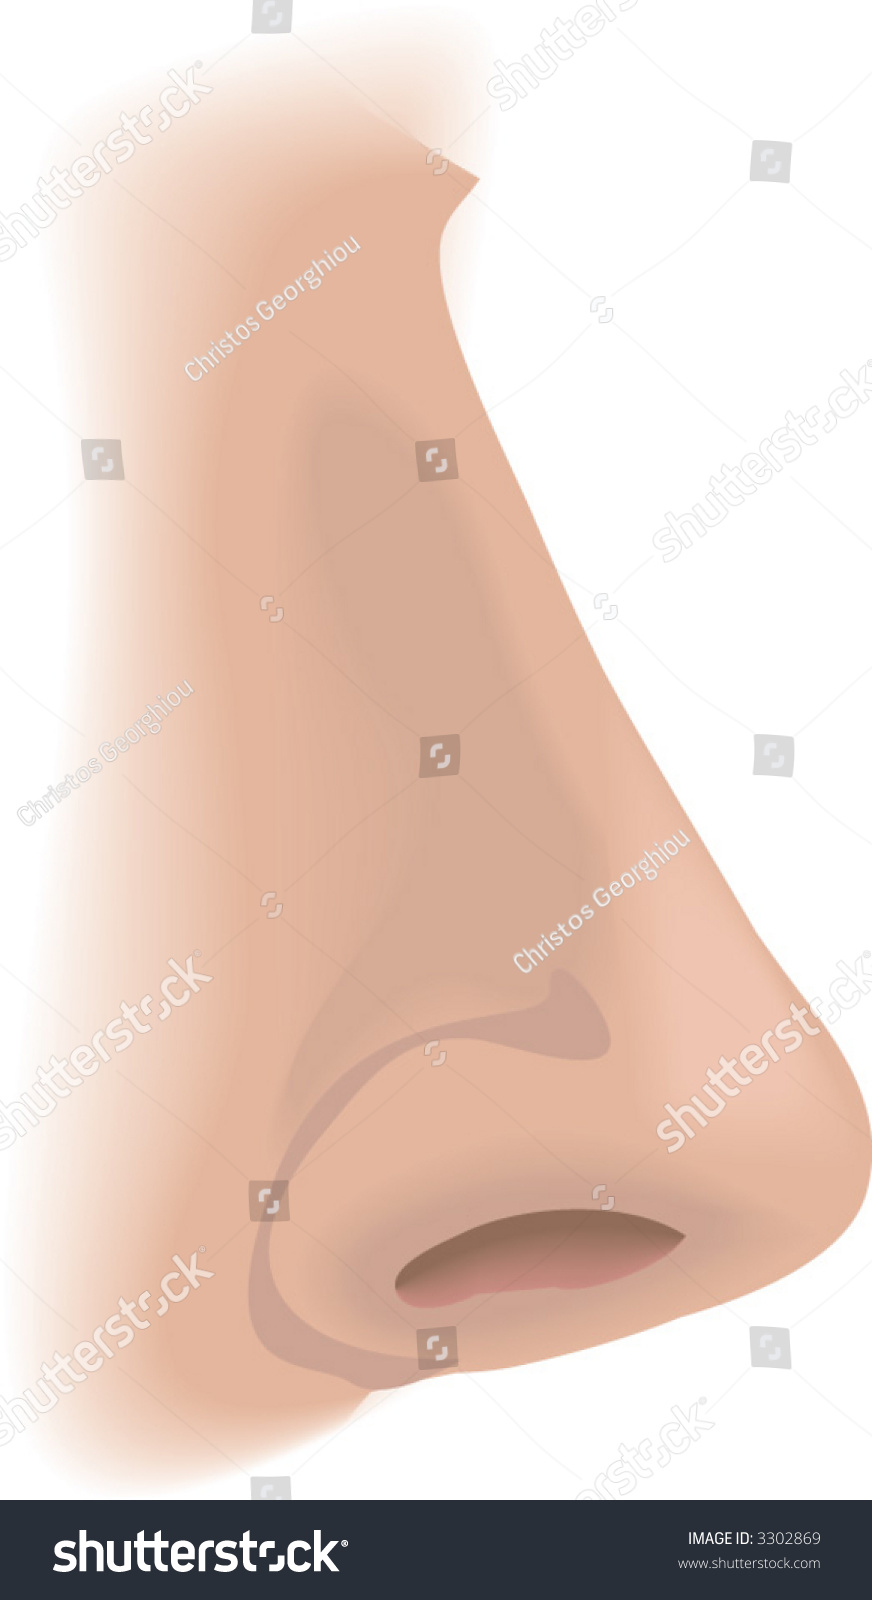 Body Parts Nose Illustration Human Nose Stock Vector 3302869 - Shutterstock